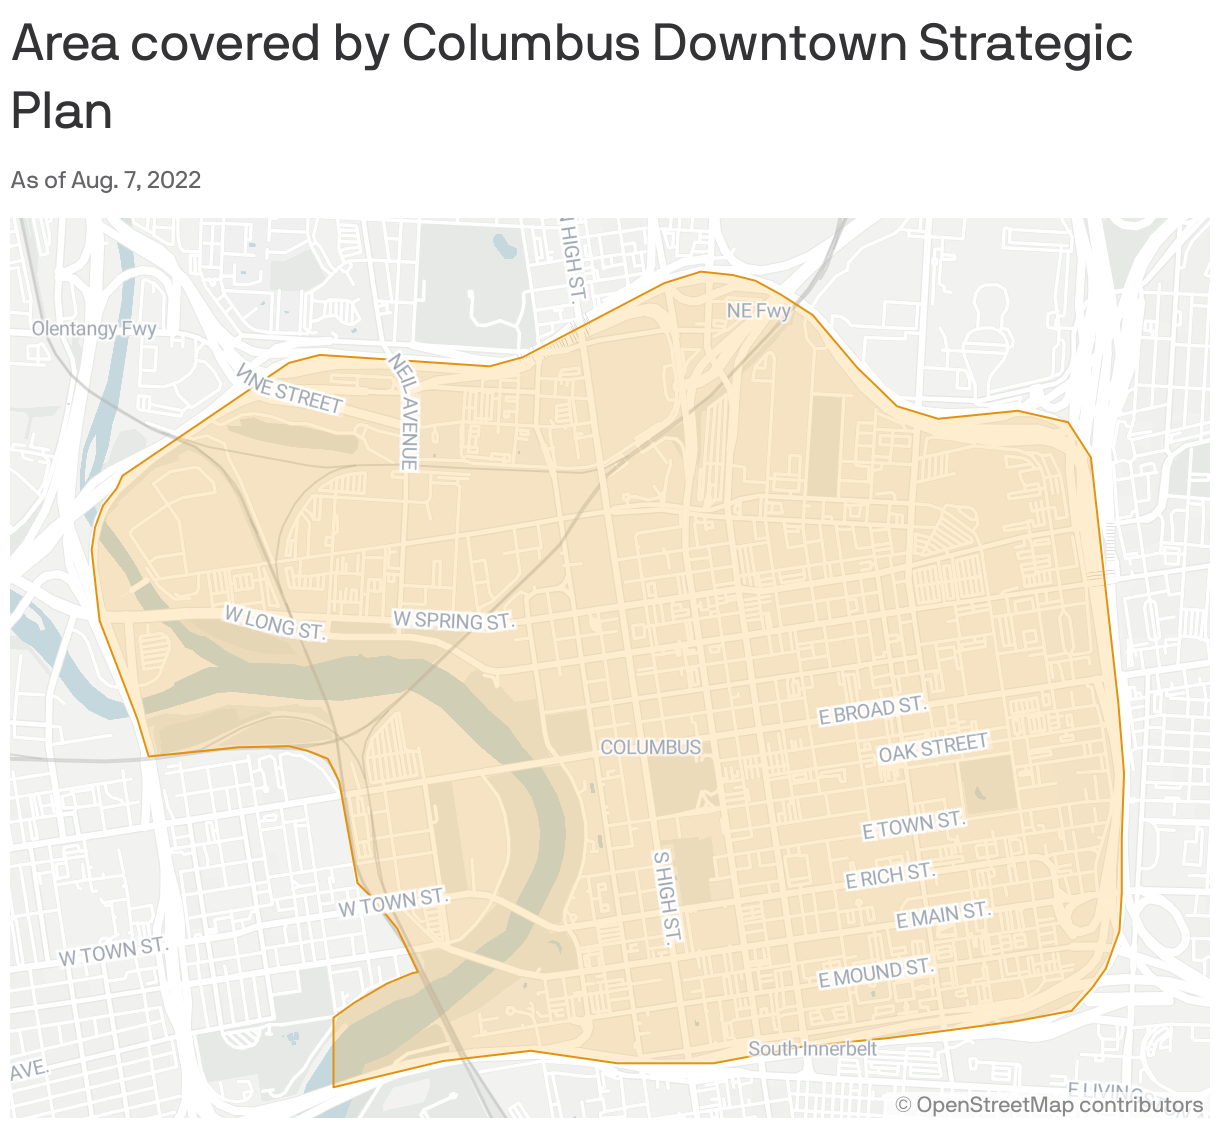 Area covered by Columbus Downtown Strategic Plan